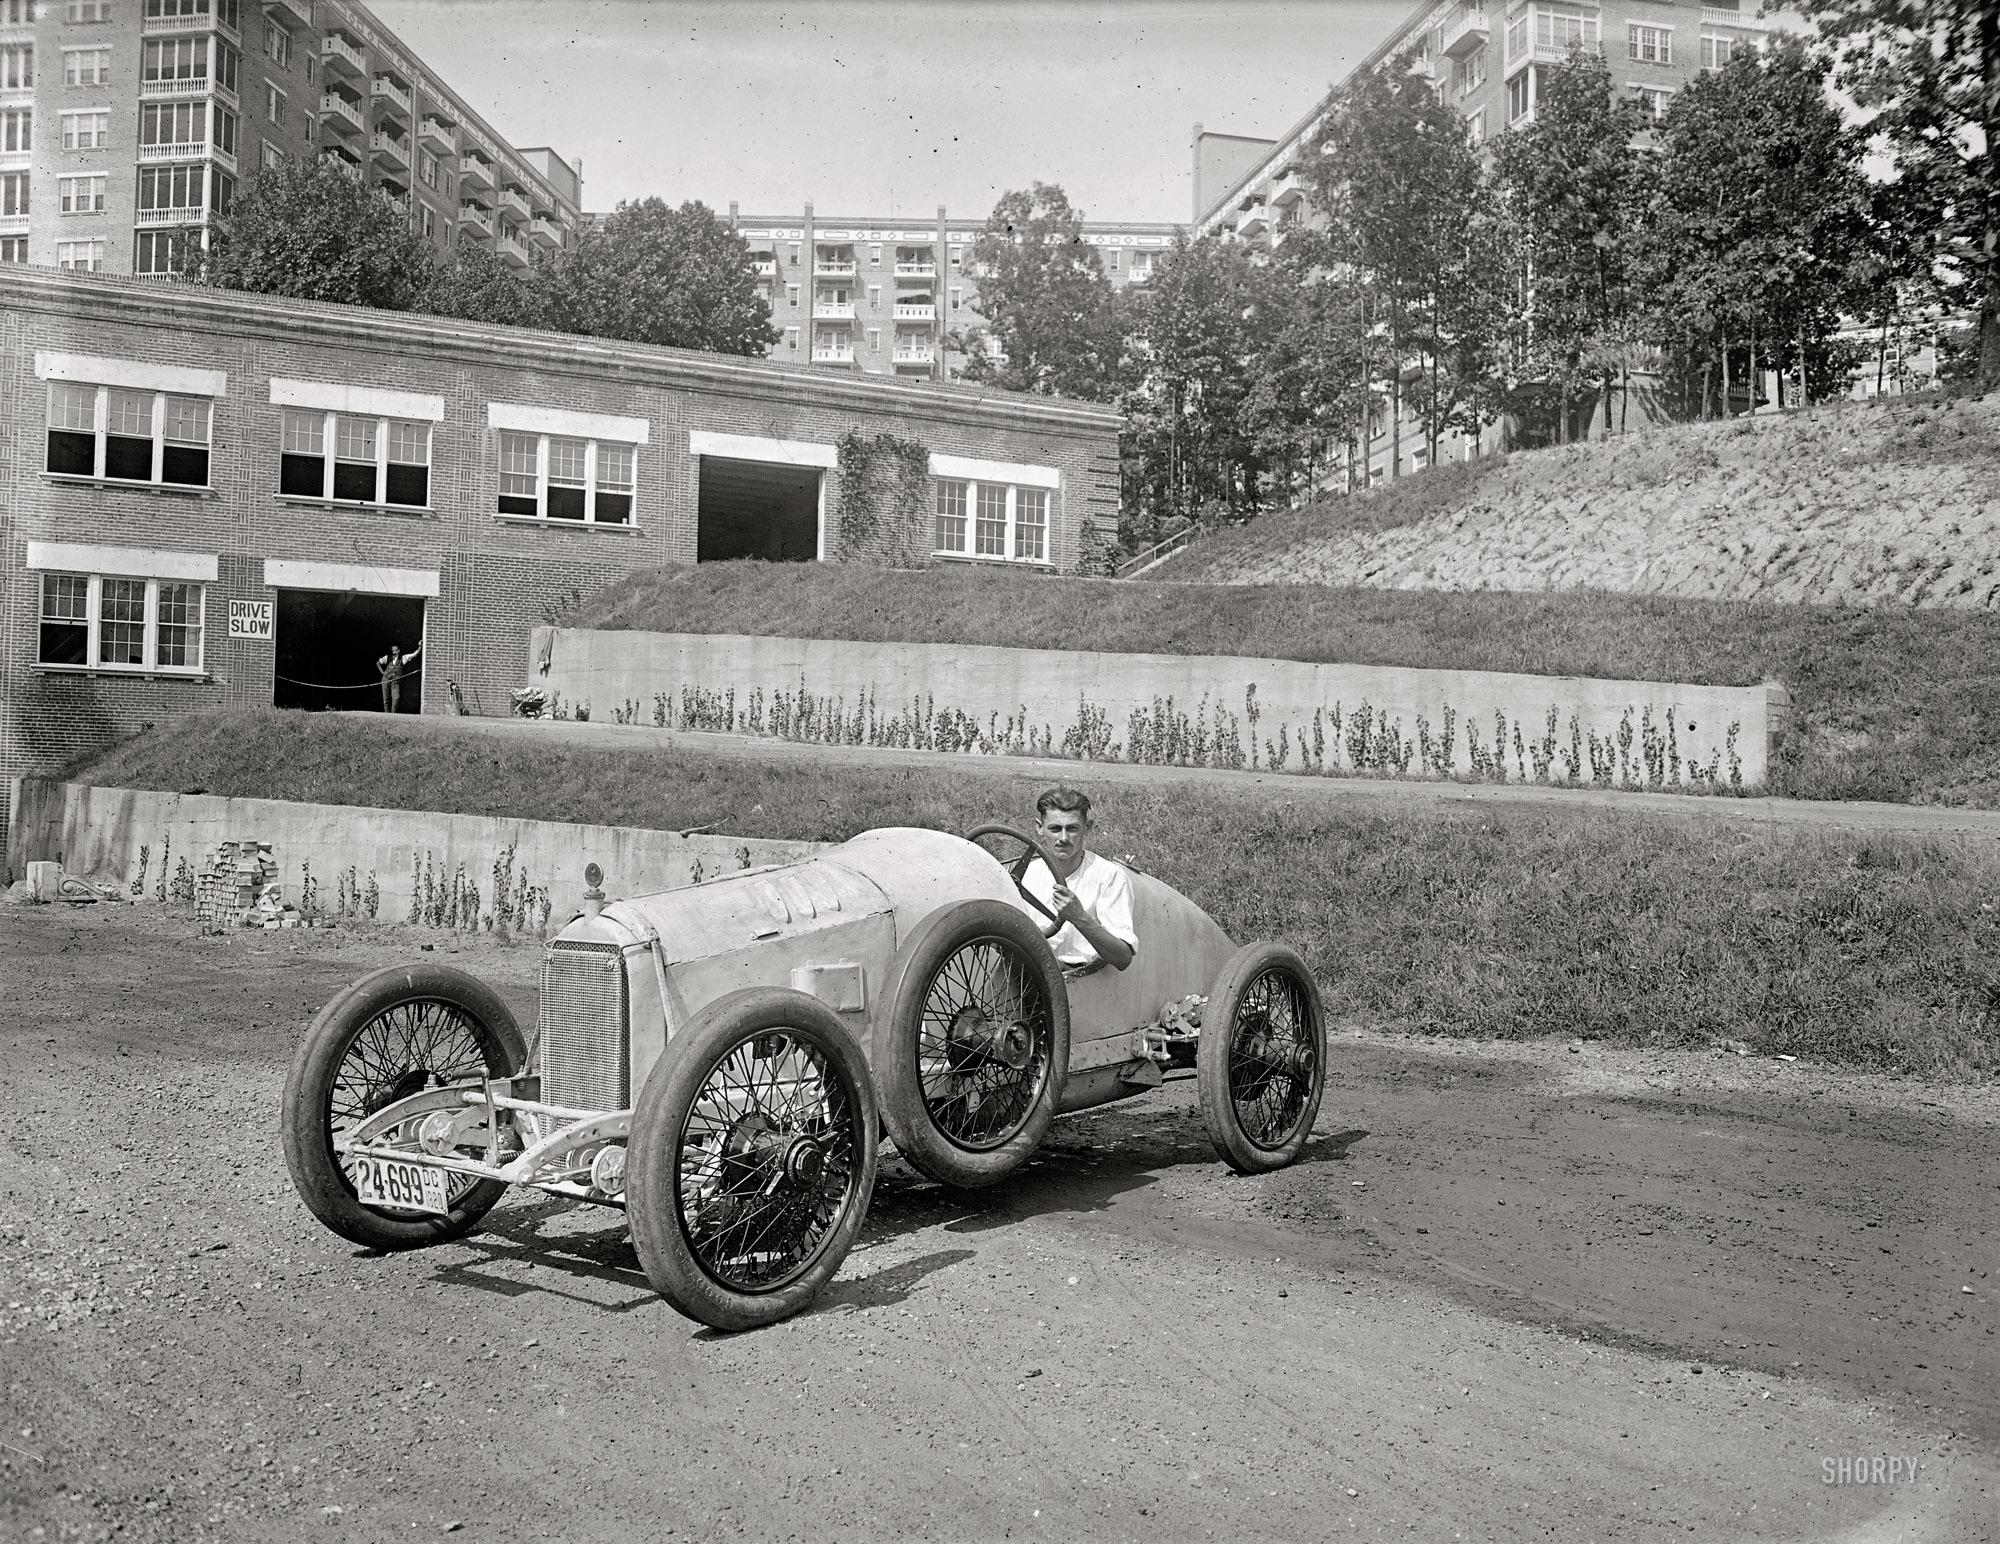 Washington, D.C., circa 1920. "Donnie Moore in Duesenberg." Last seen here a year ago. National Photo Company Collection glass negative. View full size.